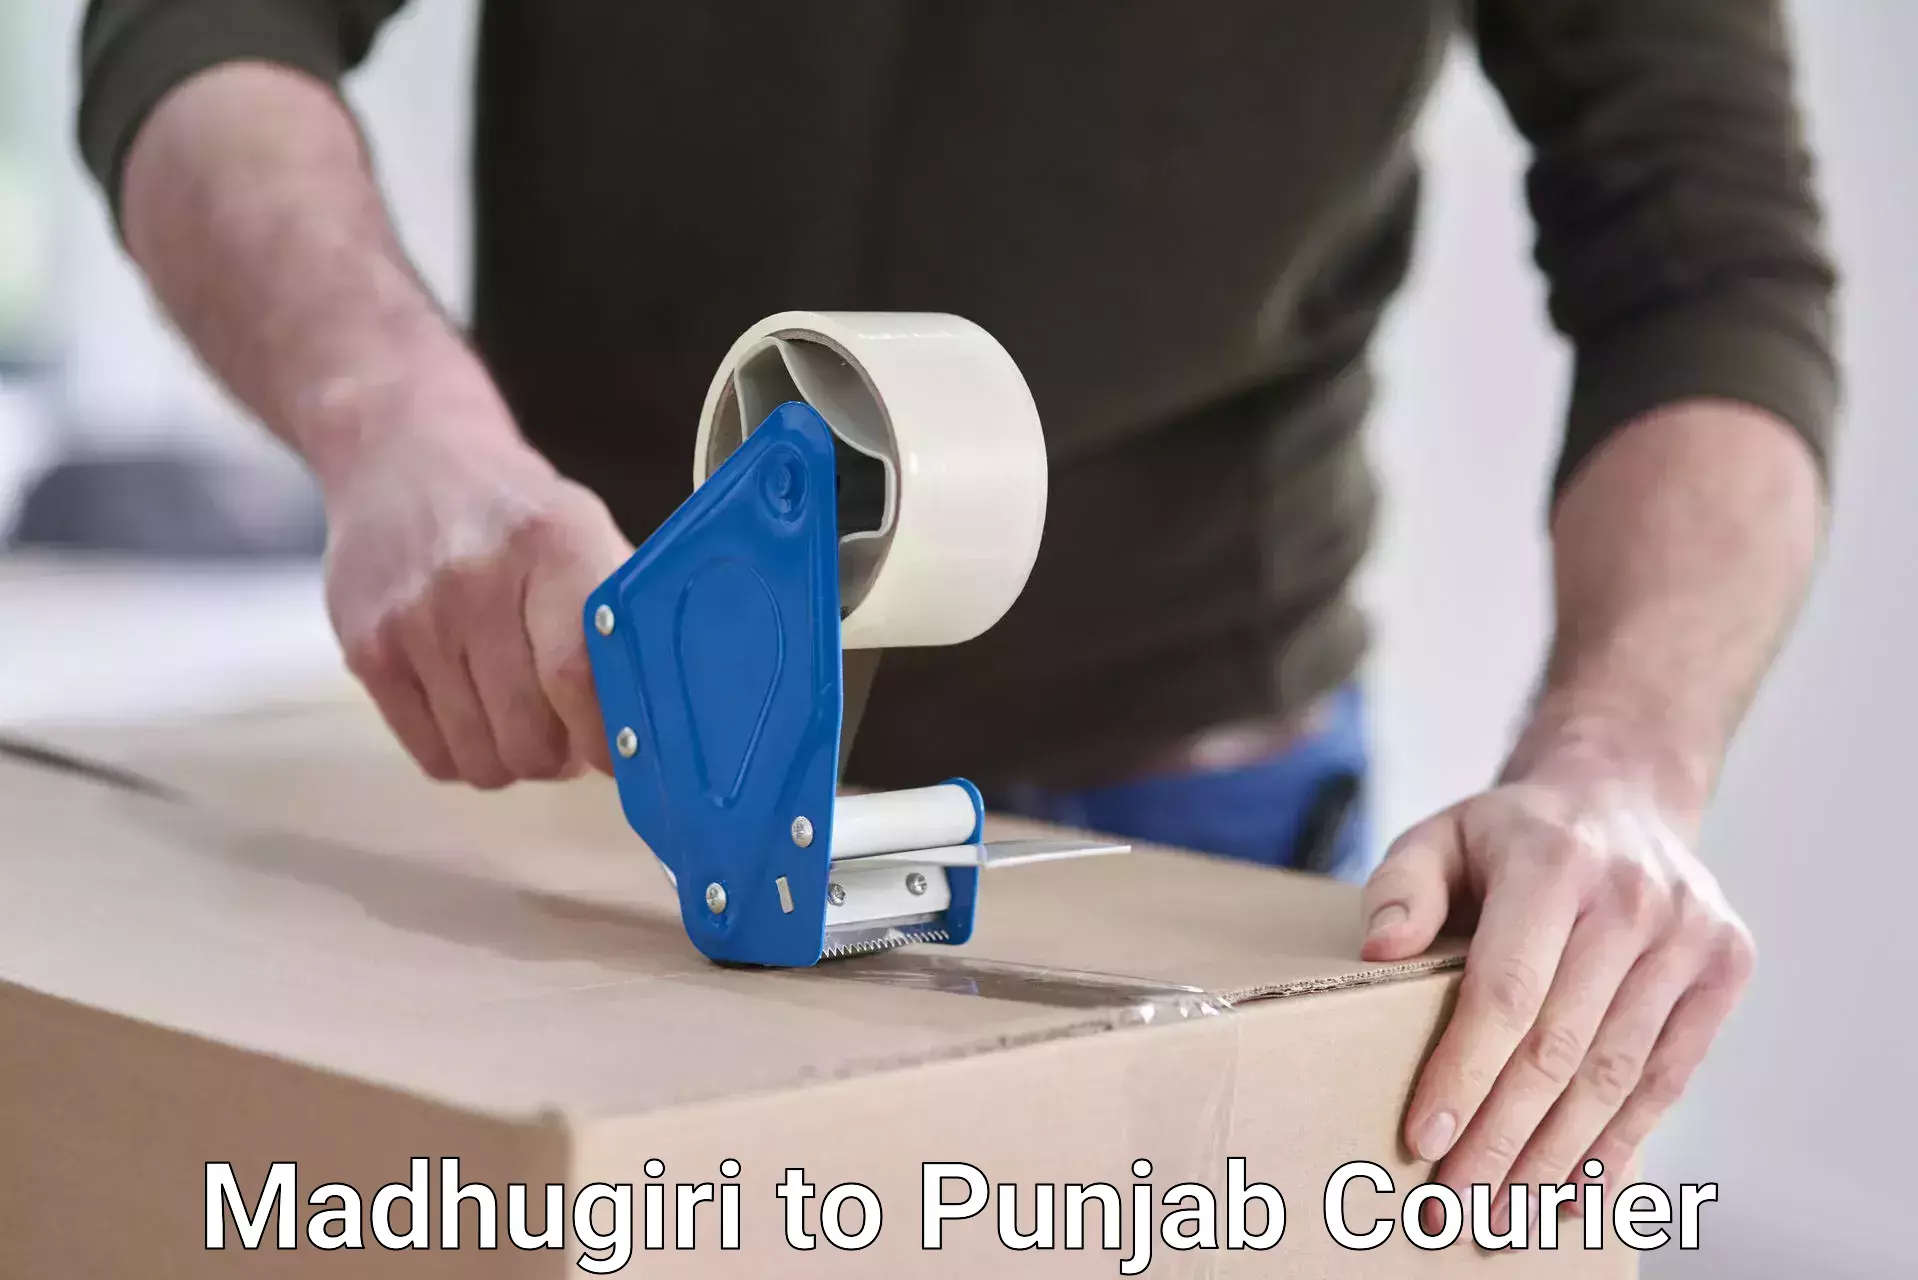 Express delivery capabilities Madhugiri to Punjab